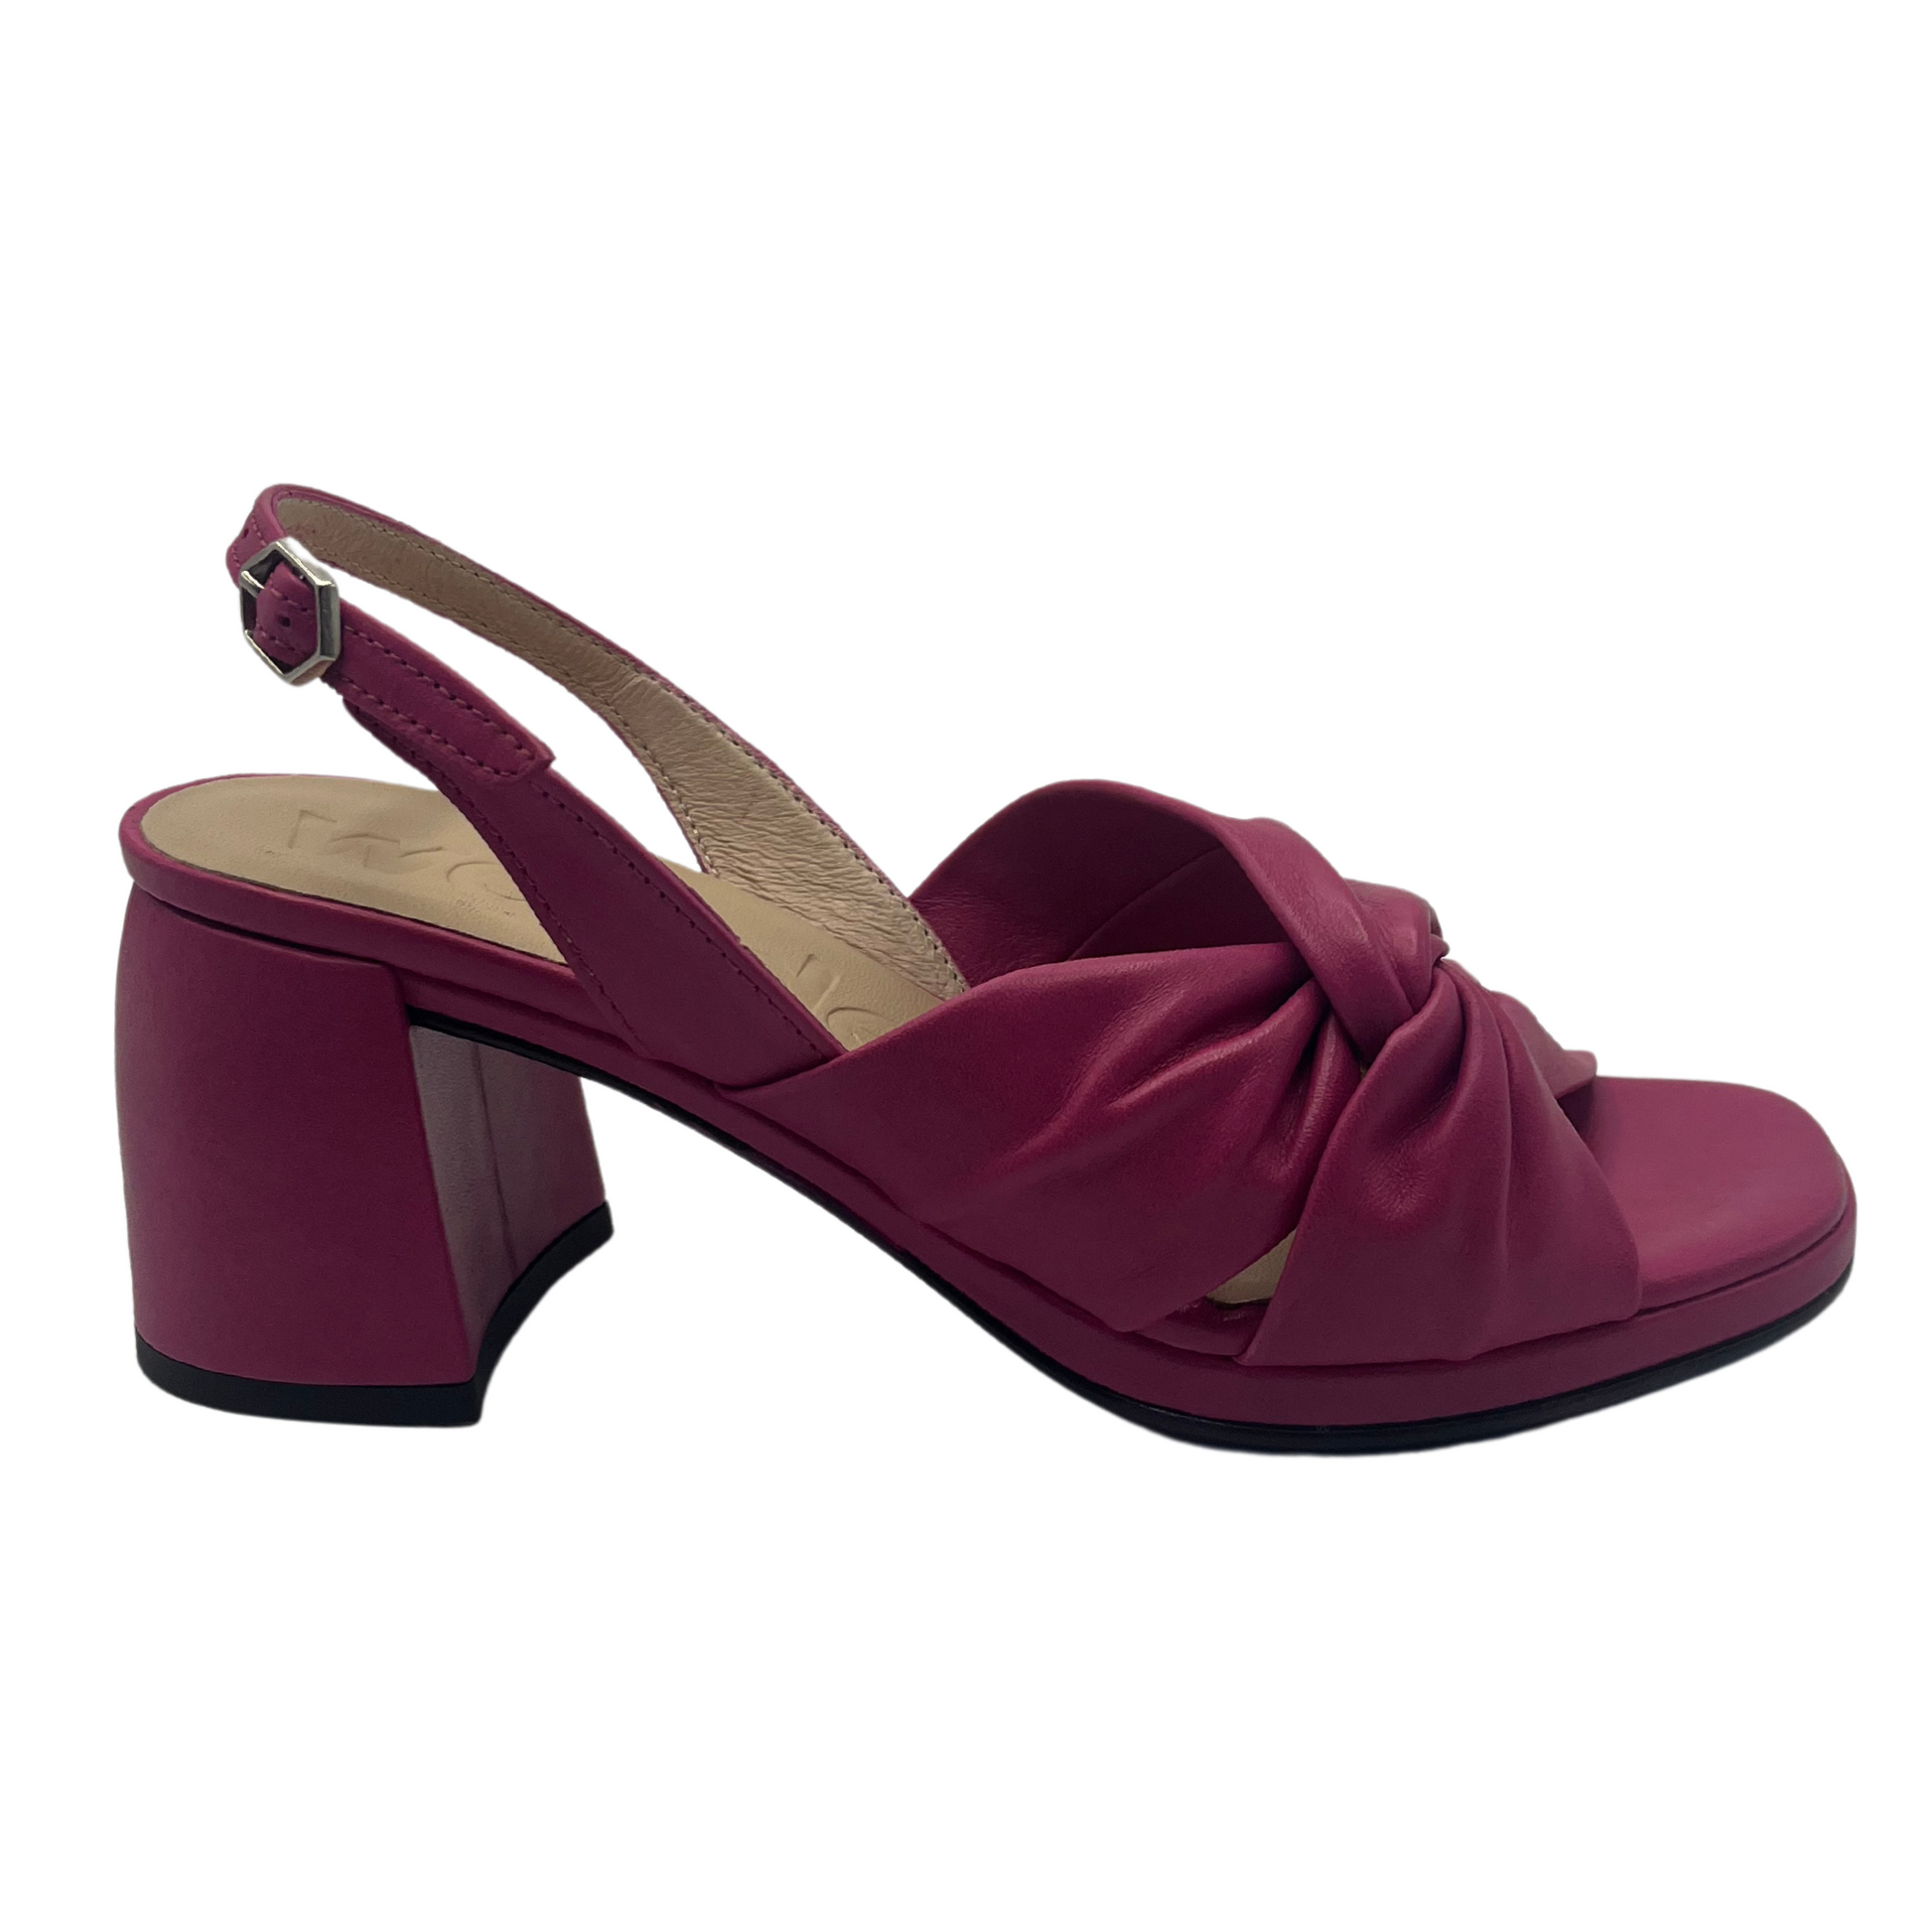 Right facing view of orchid leather sandal with buckle strap and chunky block heel